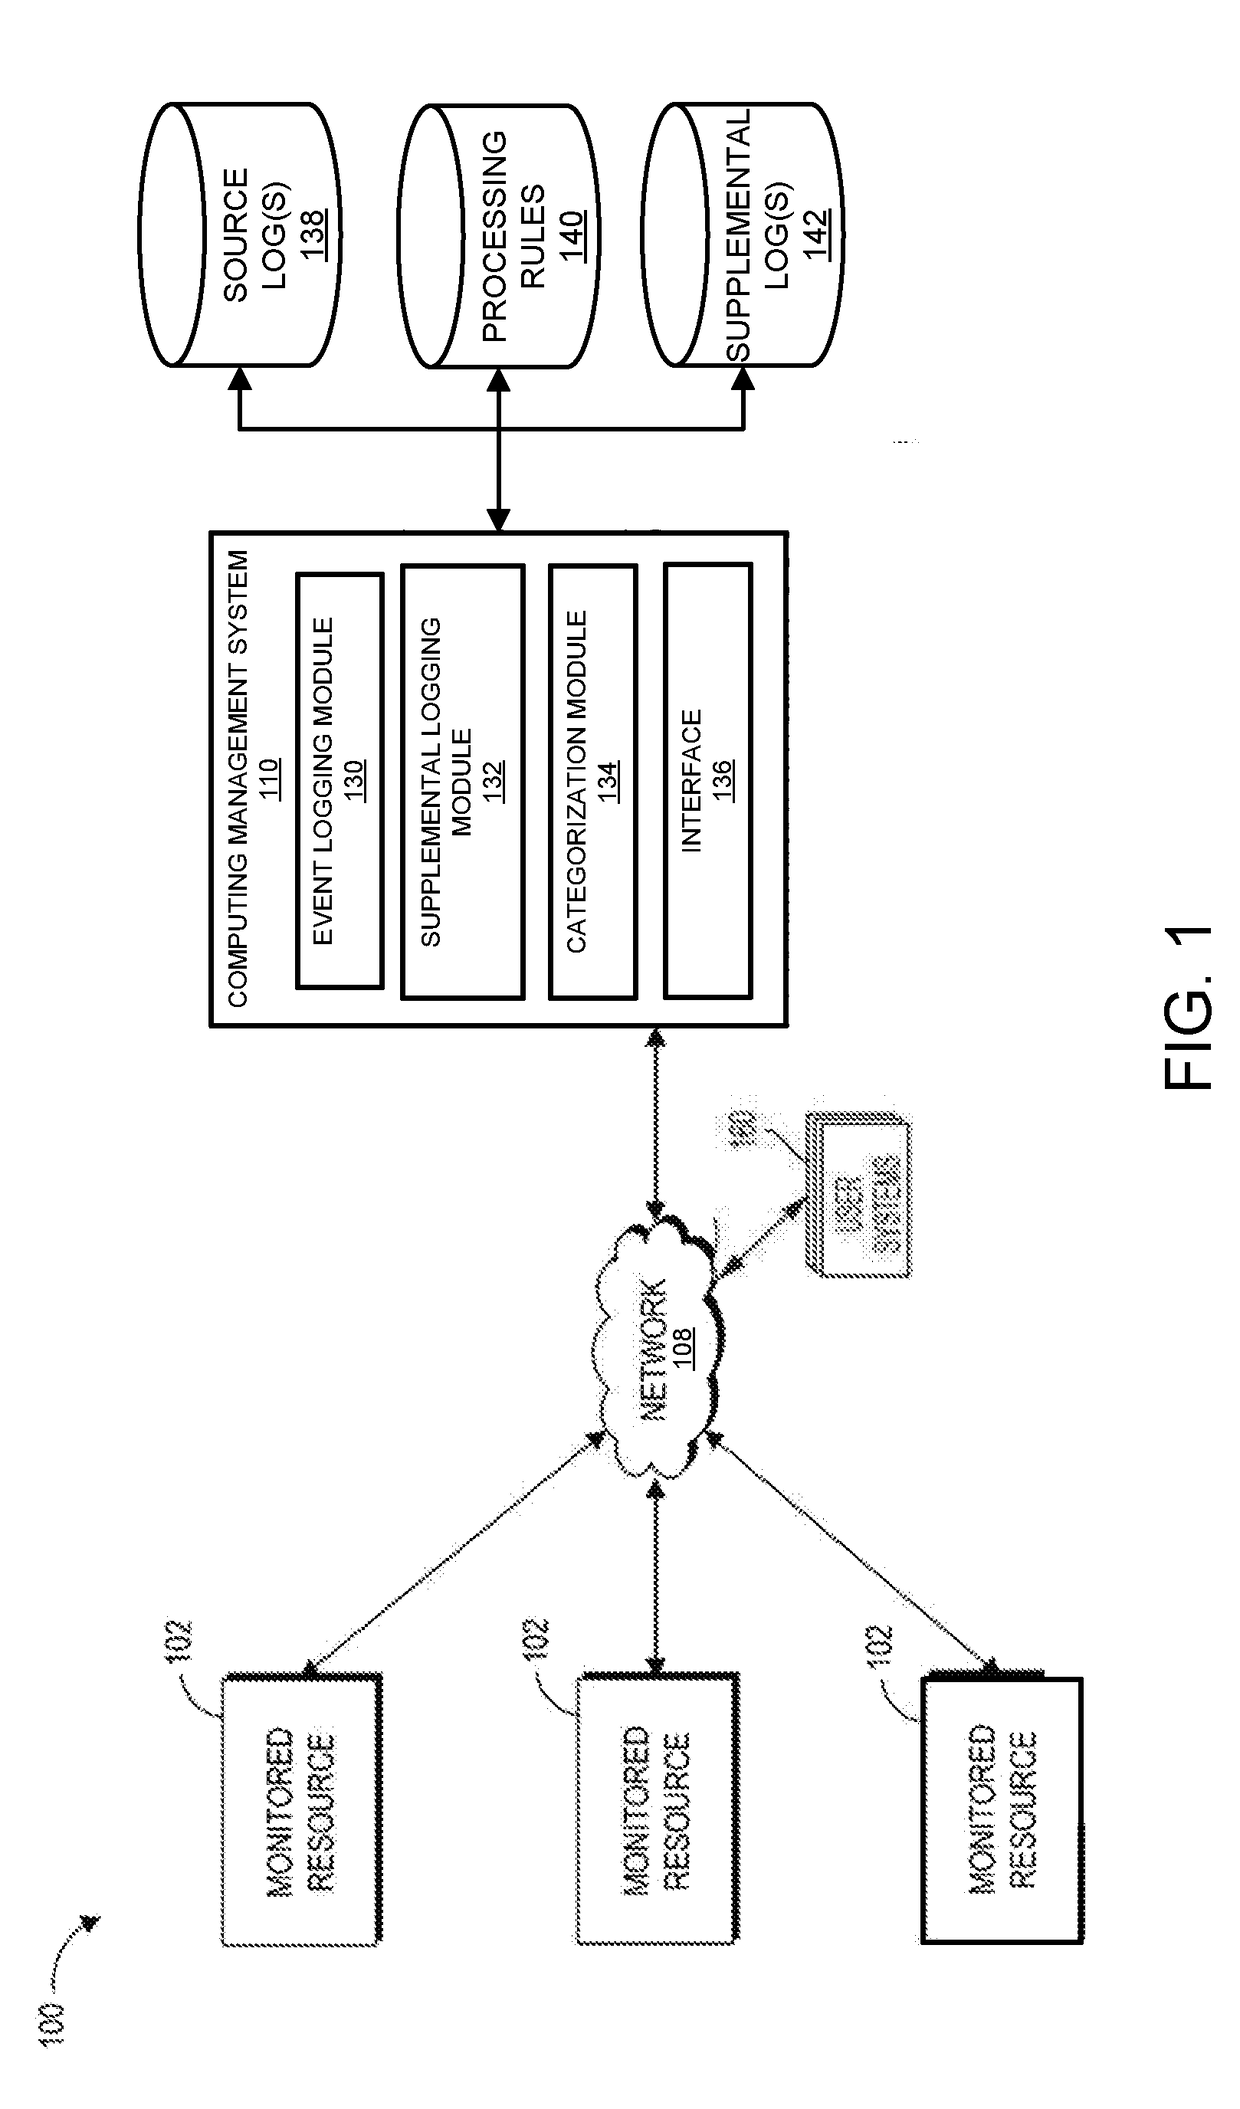 Systems and methods for logging and categorizing performance events